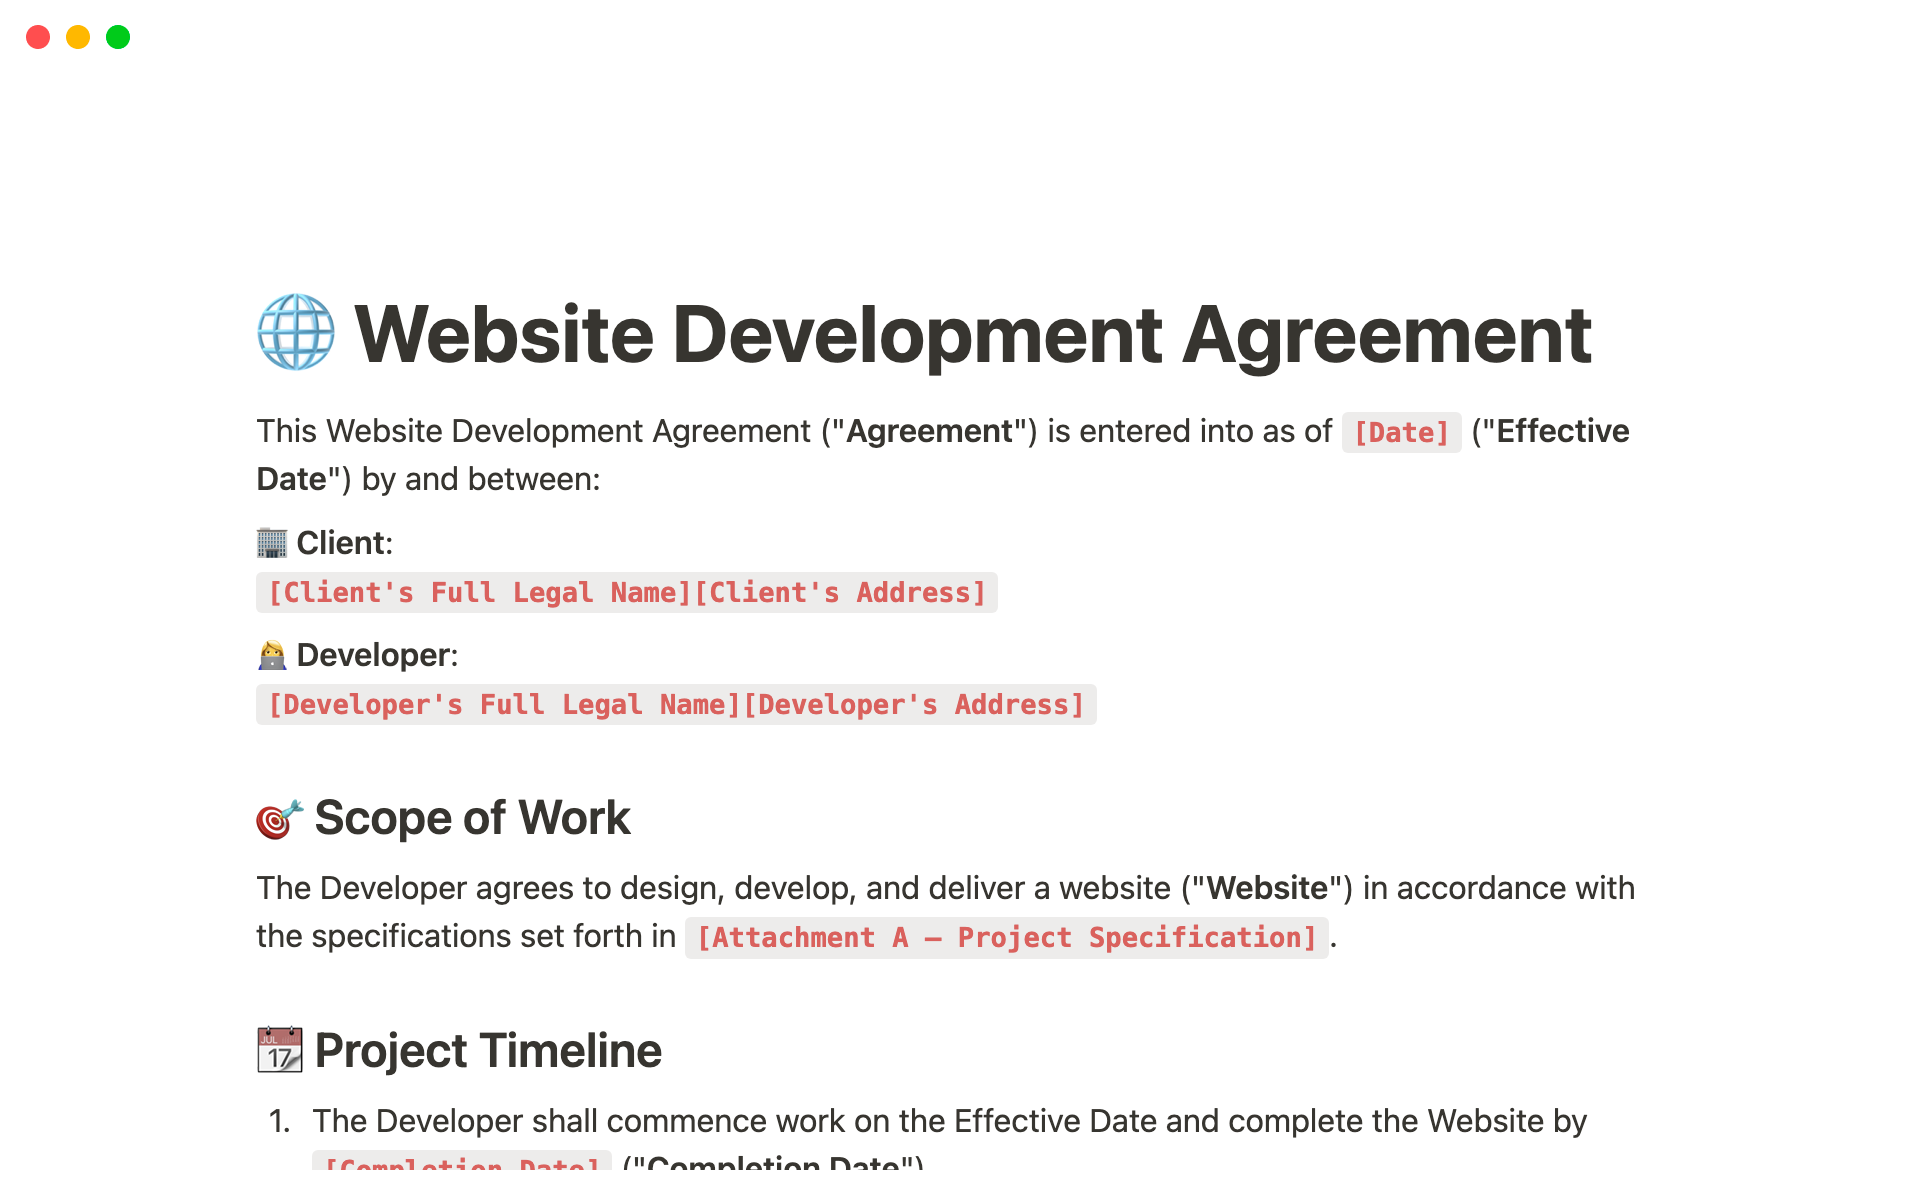 This Website Development Agreement template provides a comprehensive outline for clients and website developers.